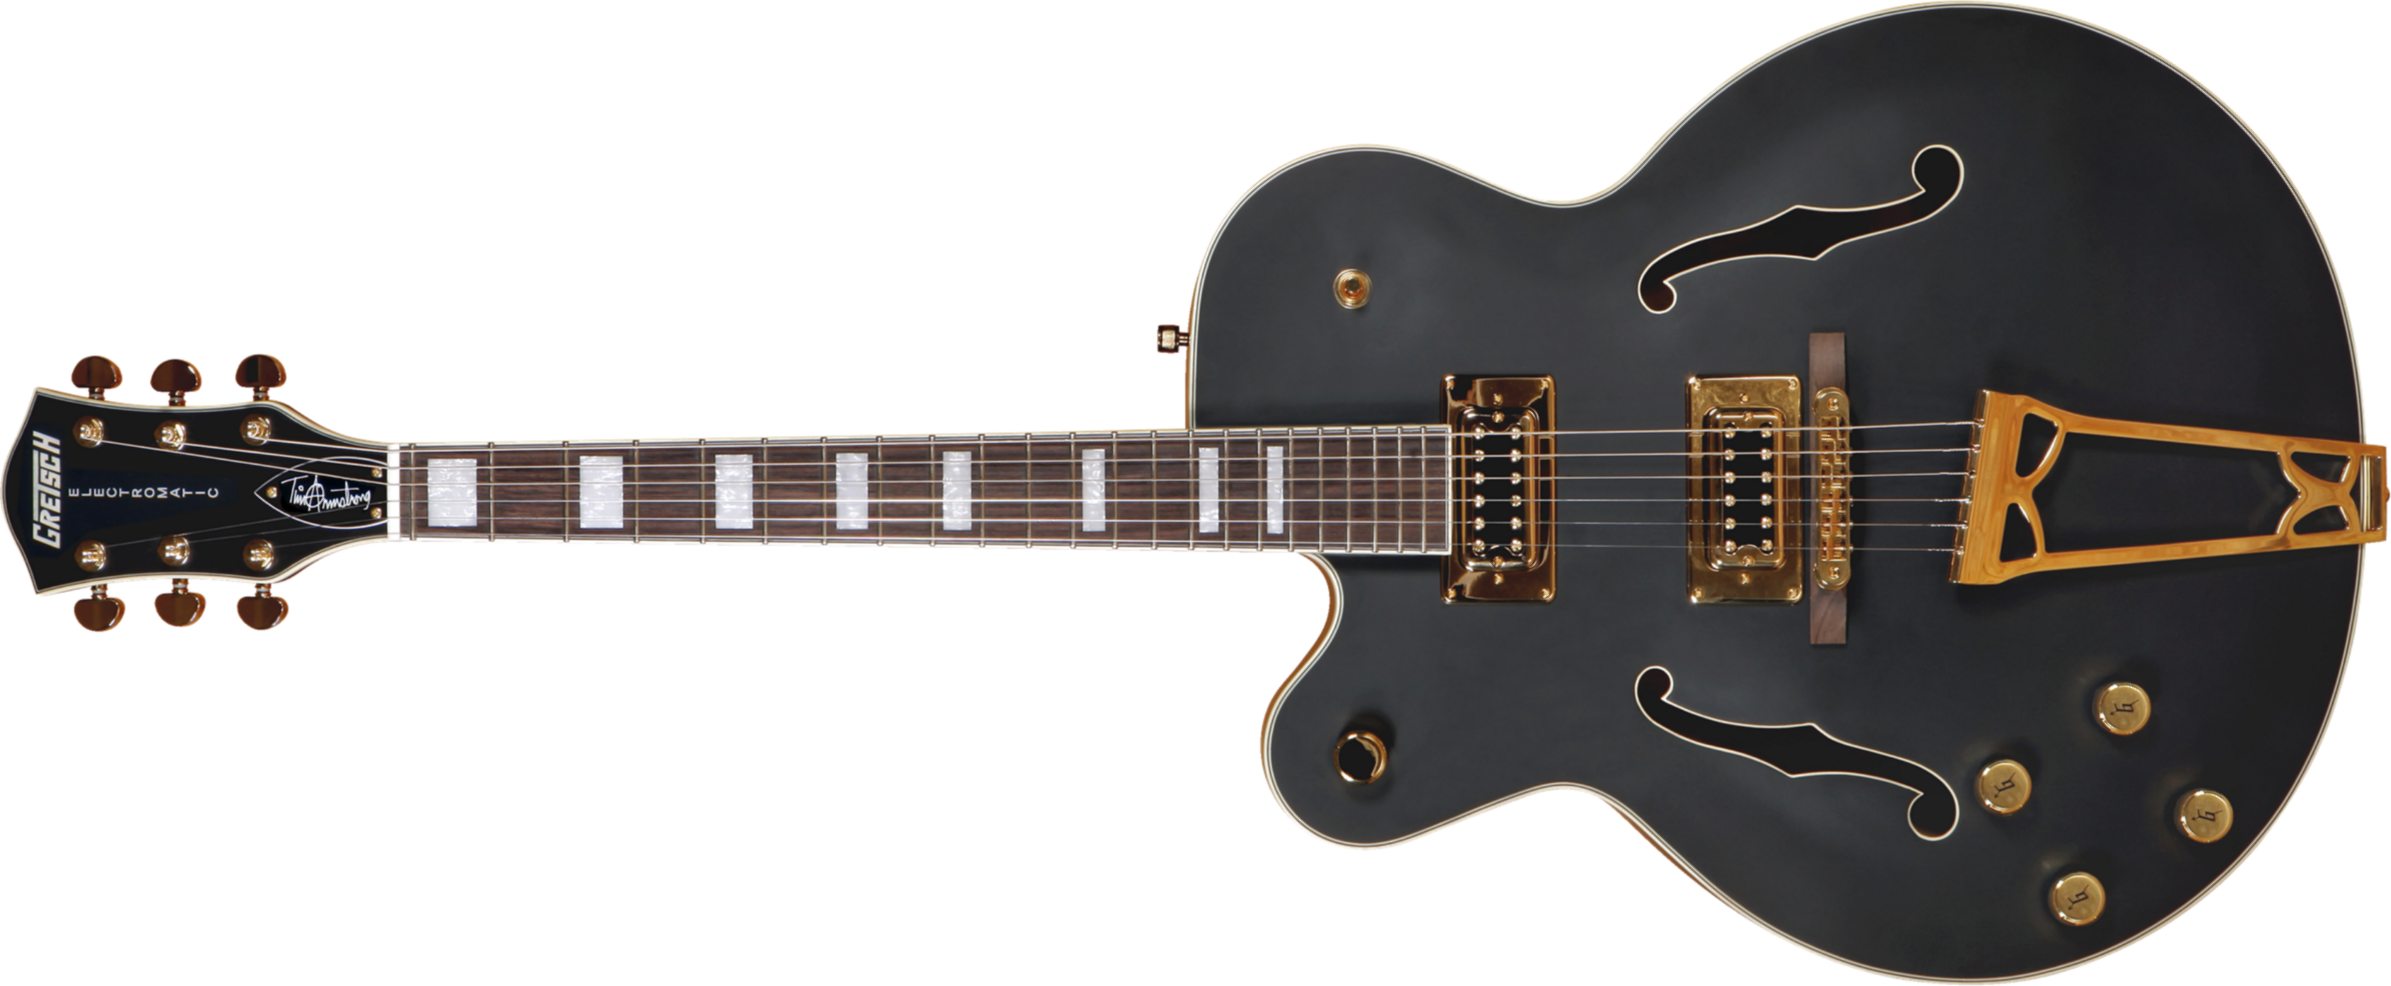 Gretsch Tim Armstrong G5191bk Electromatic Hollow Body Left-handed - Black Matte - Left-handed electric guitar - Main picture